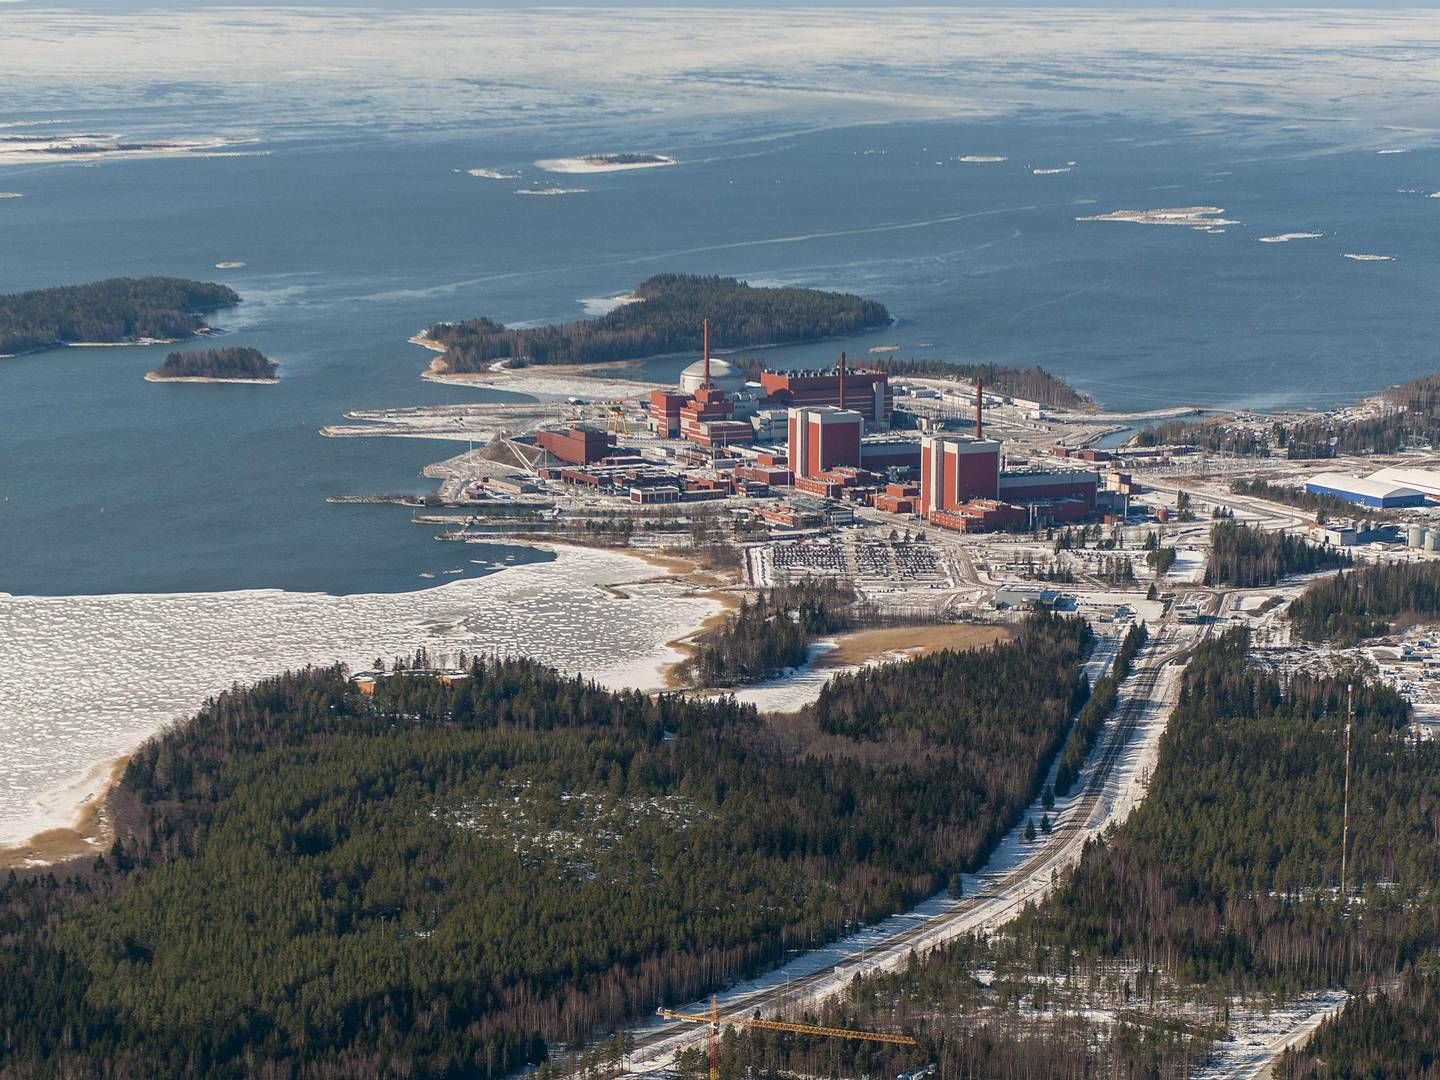 Finlands next-generation Olkiluoto 3 nuclear reactor has gone into regular production after months of delays, producing on its own around 14% of the countrys electricity, its operator TVO said April 16, 2023. The European pressurised water reactor (EPR), already more than 12 years behind schedule, was supposed to come fully online in December, but the start was pushed back several times during its testing phase | Photo: Tapani Karjanlahti/AFP/Ritzau Scanpix